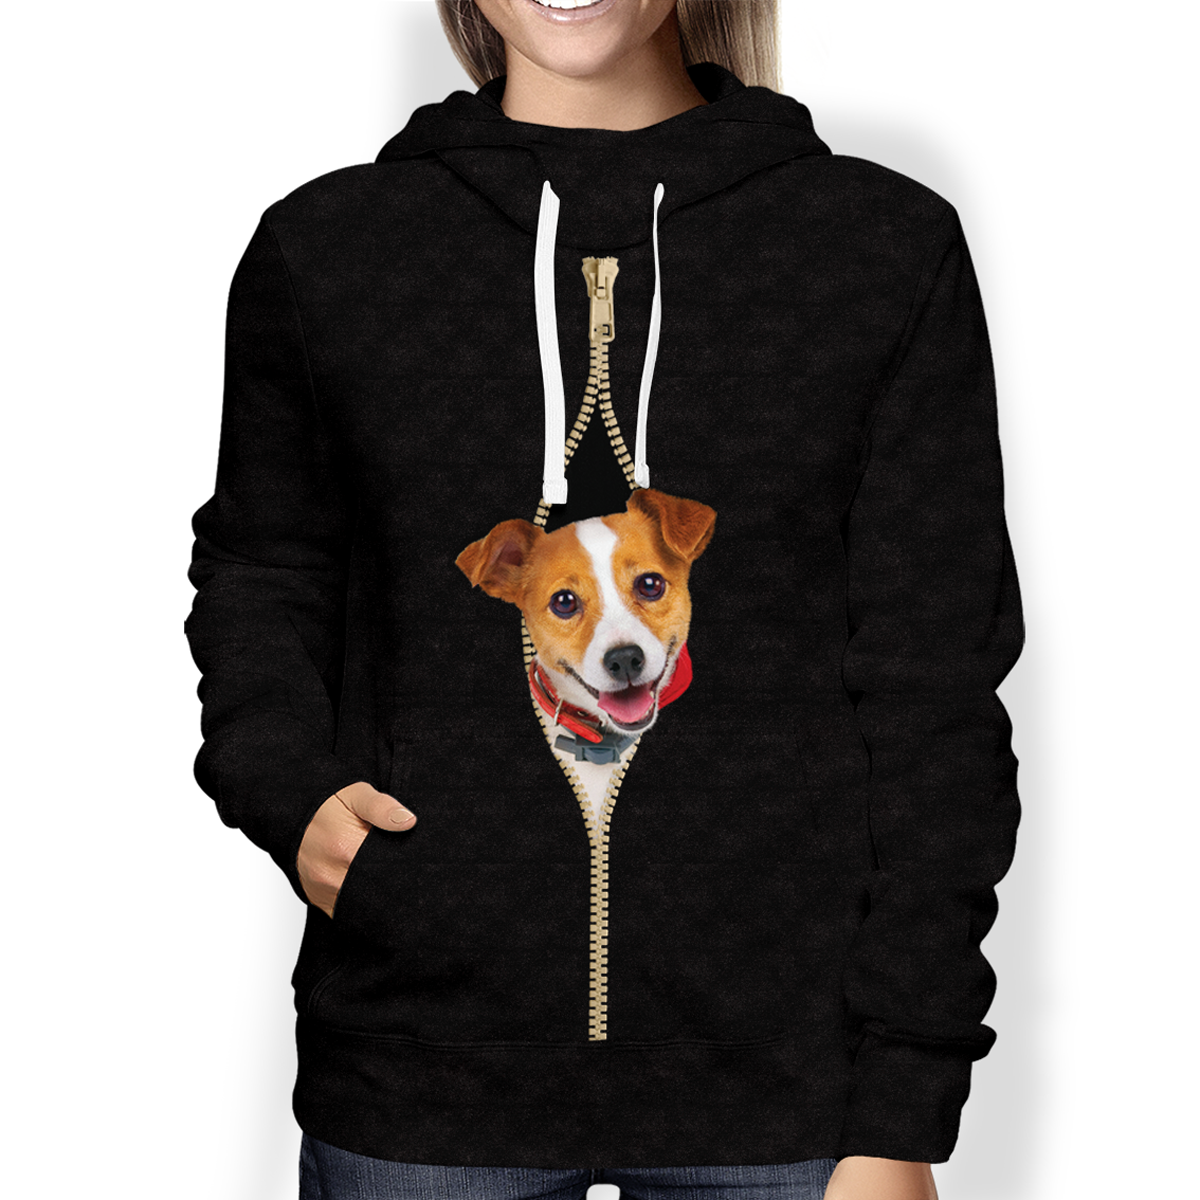 Hoodie With Your Pet's Photo - 6